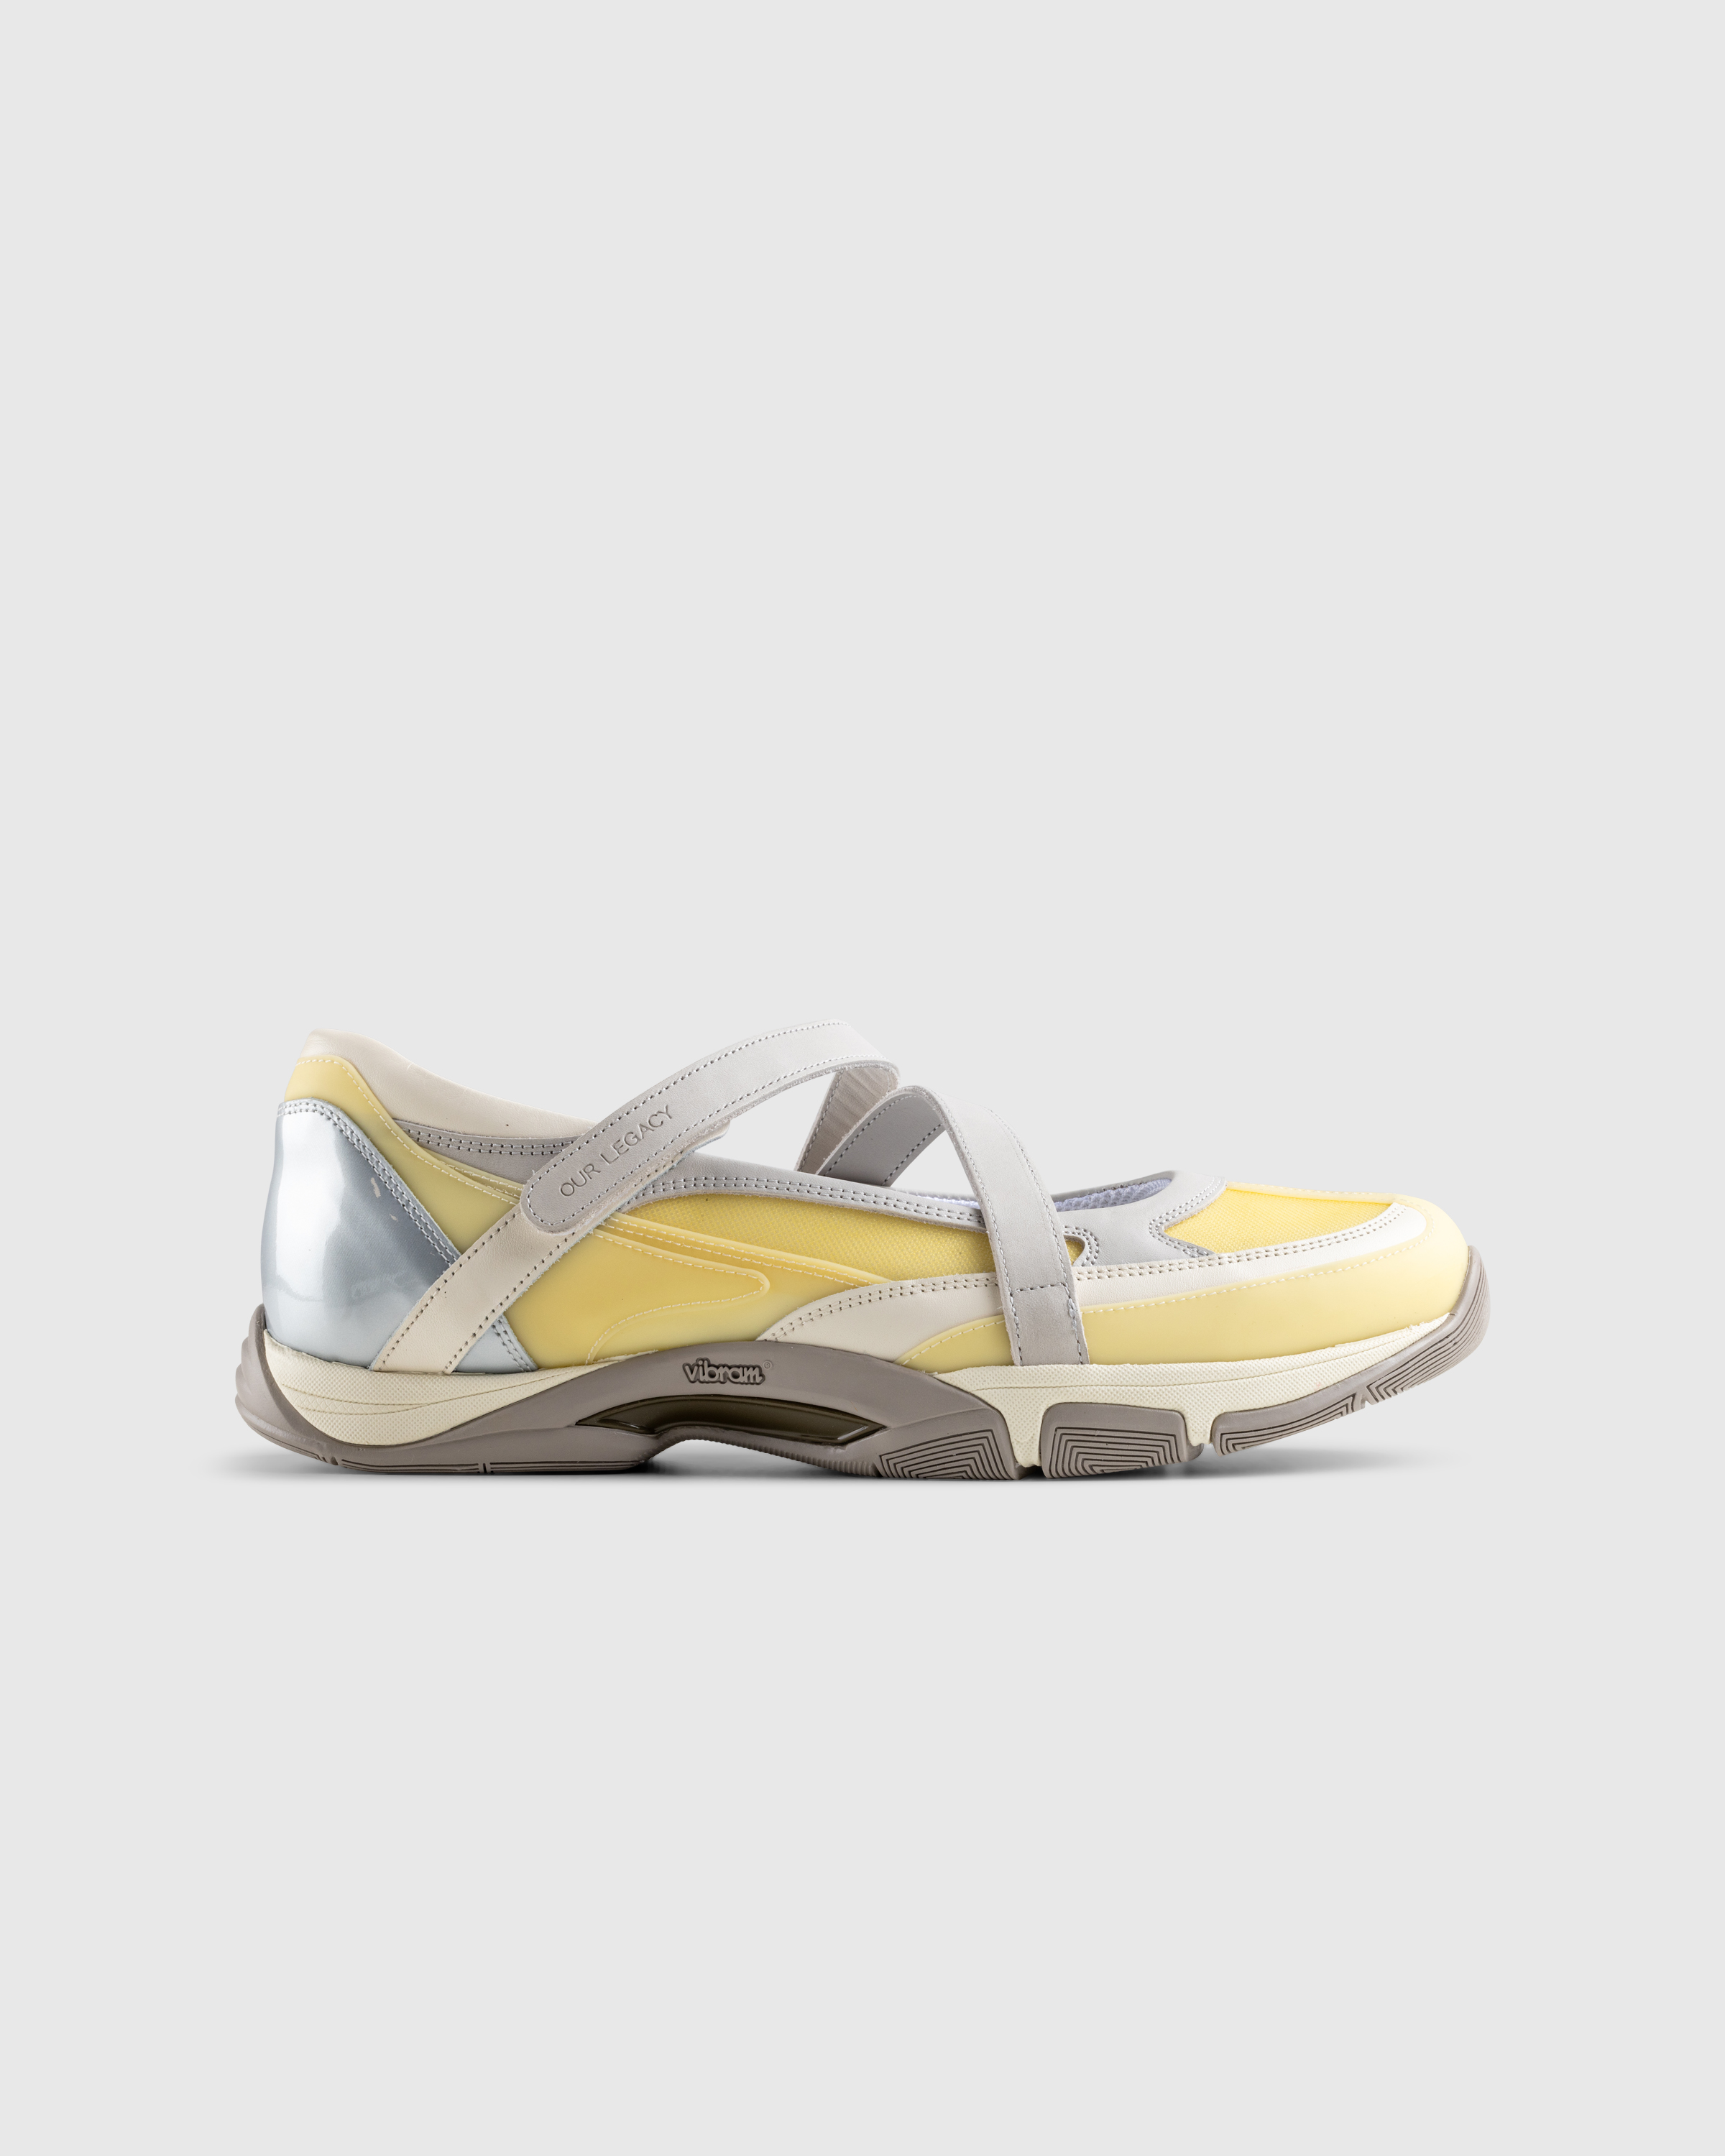 Our Legacy – Sweetheart Sport Technical Acid Leather - Shoes - Yellow - Image 1